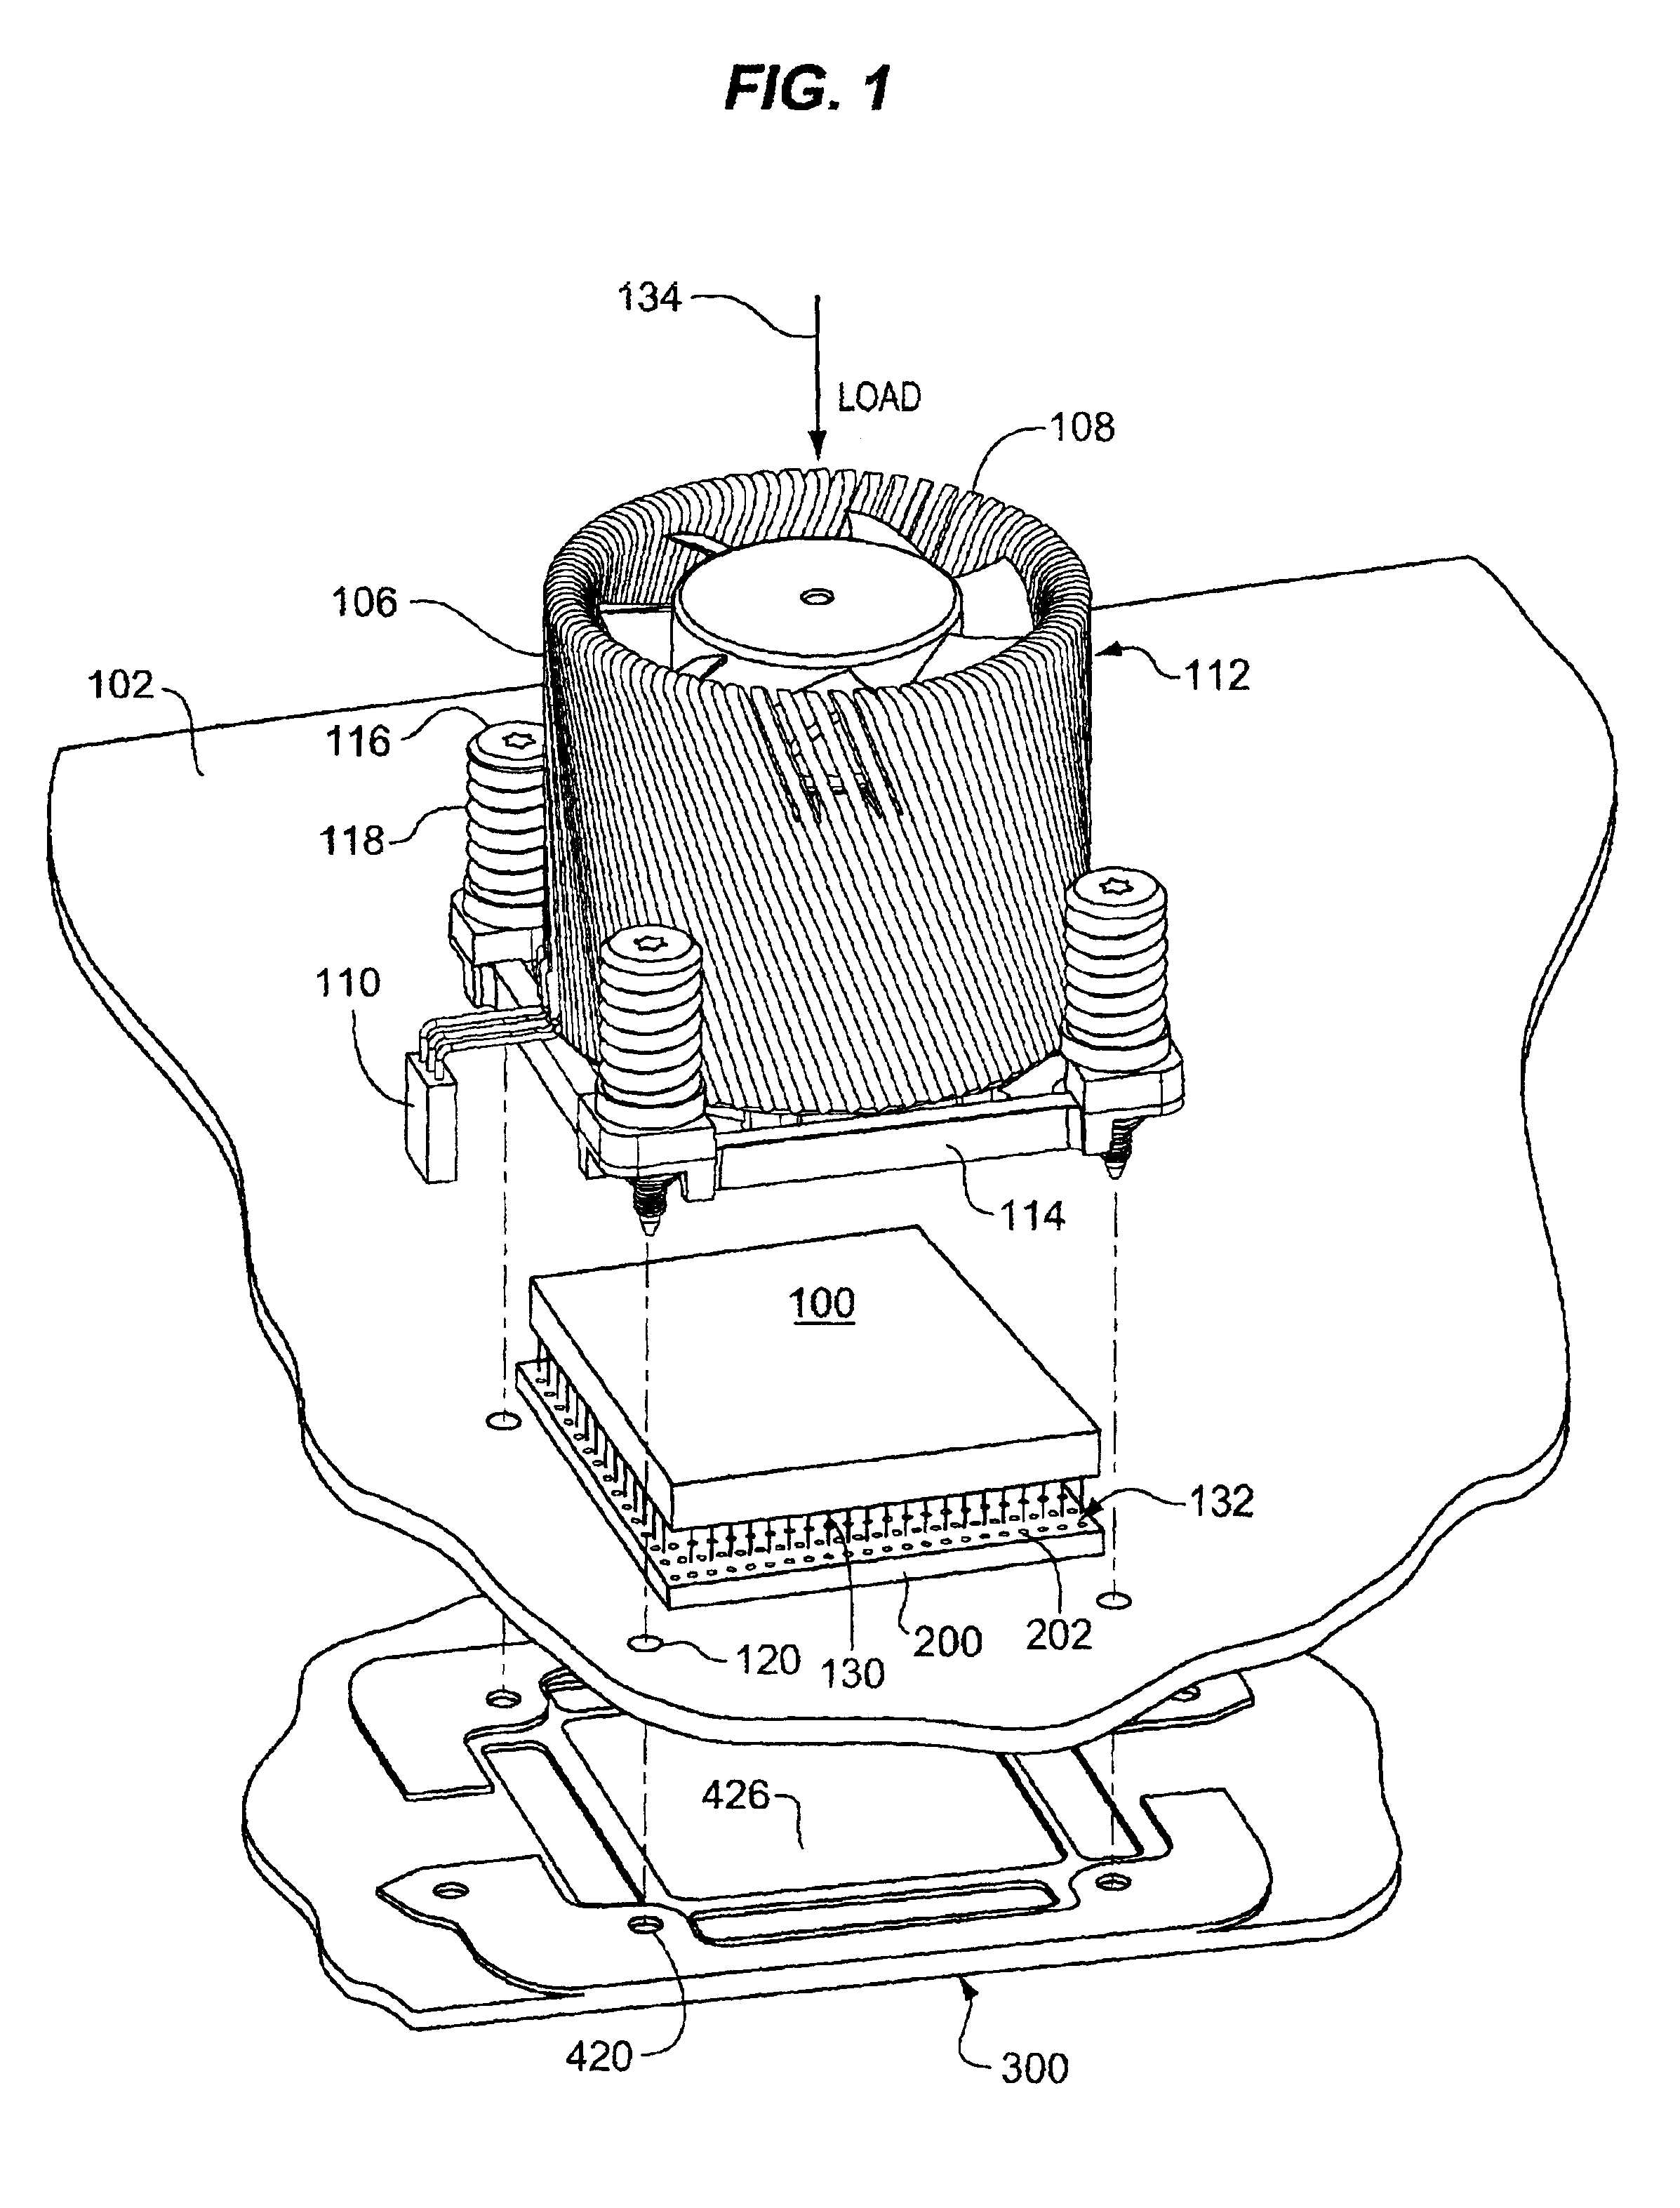 Method of attaching an integrated circuit to a chip mounting receptacle in a PCB with a bolster plate